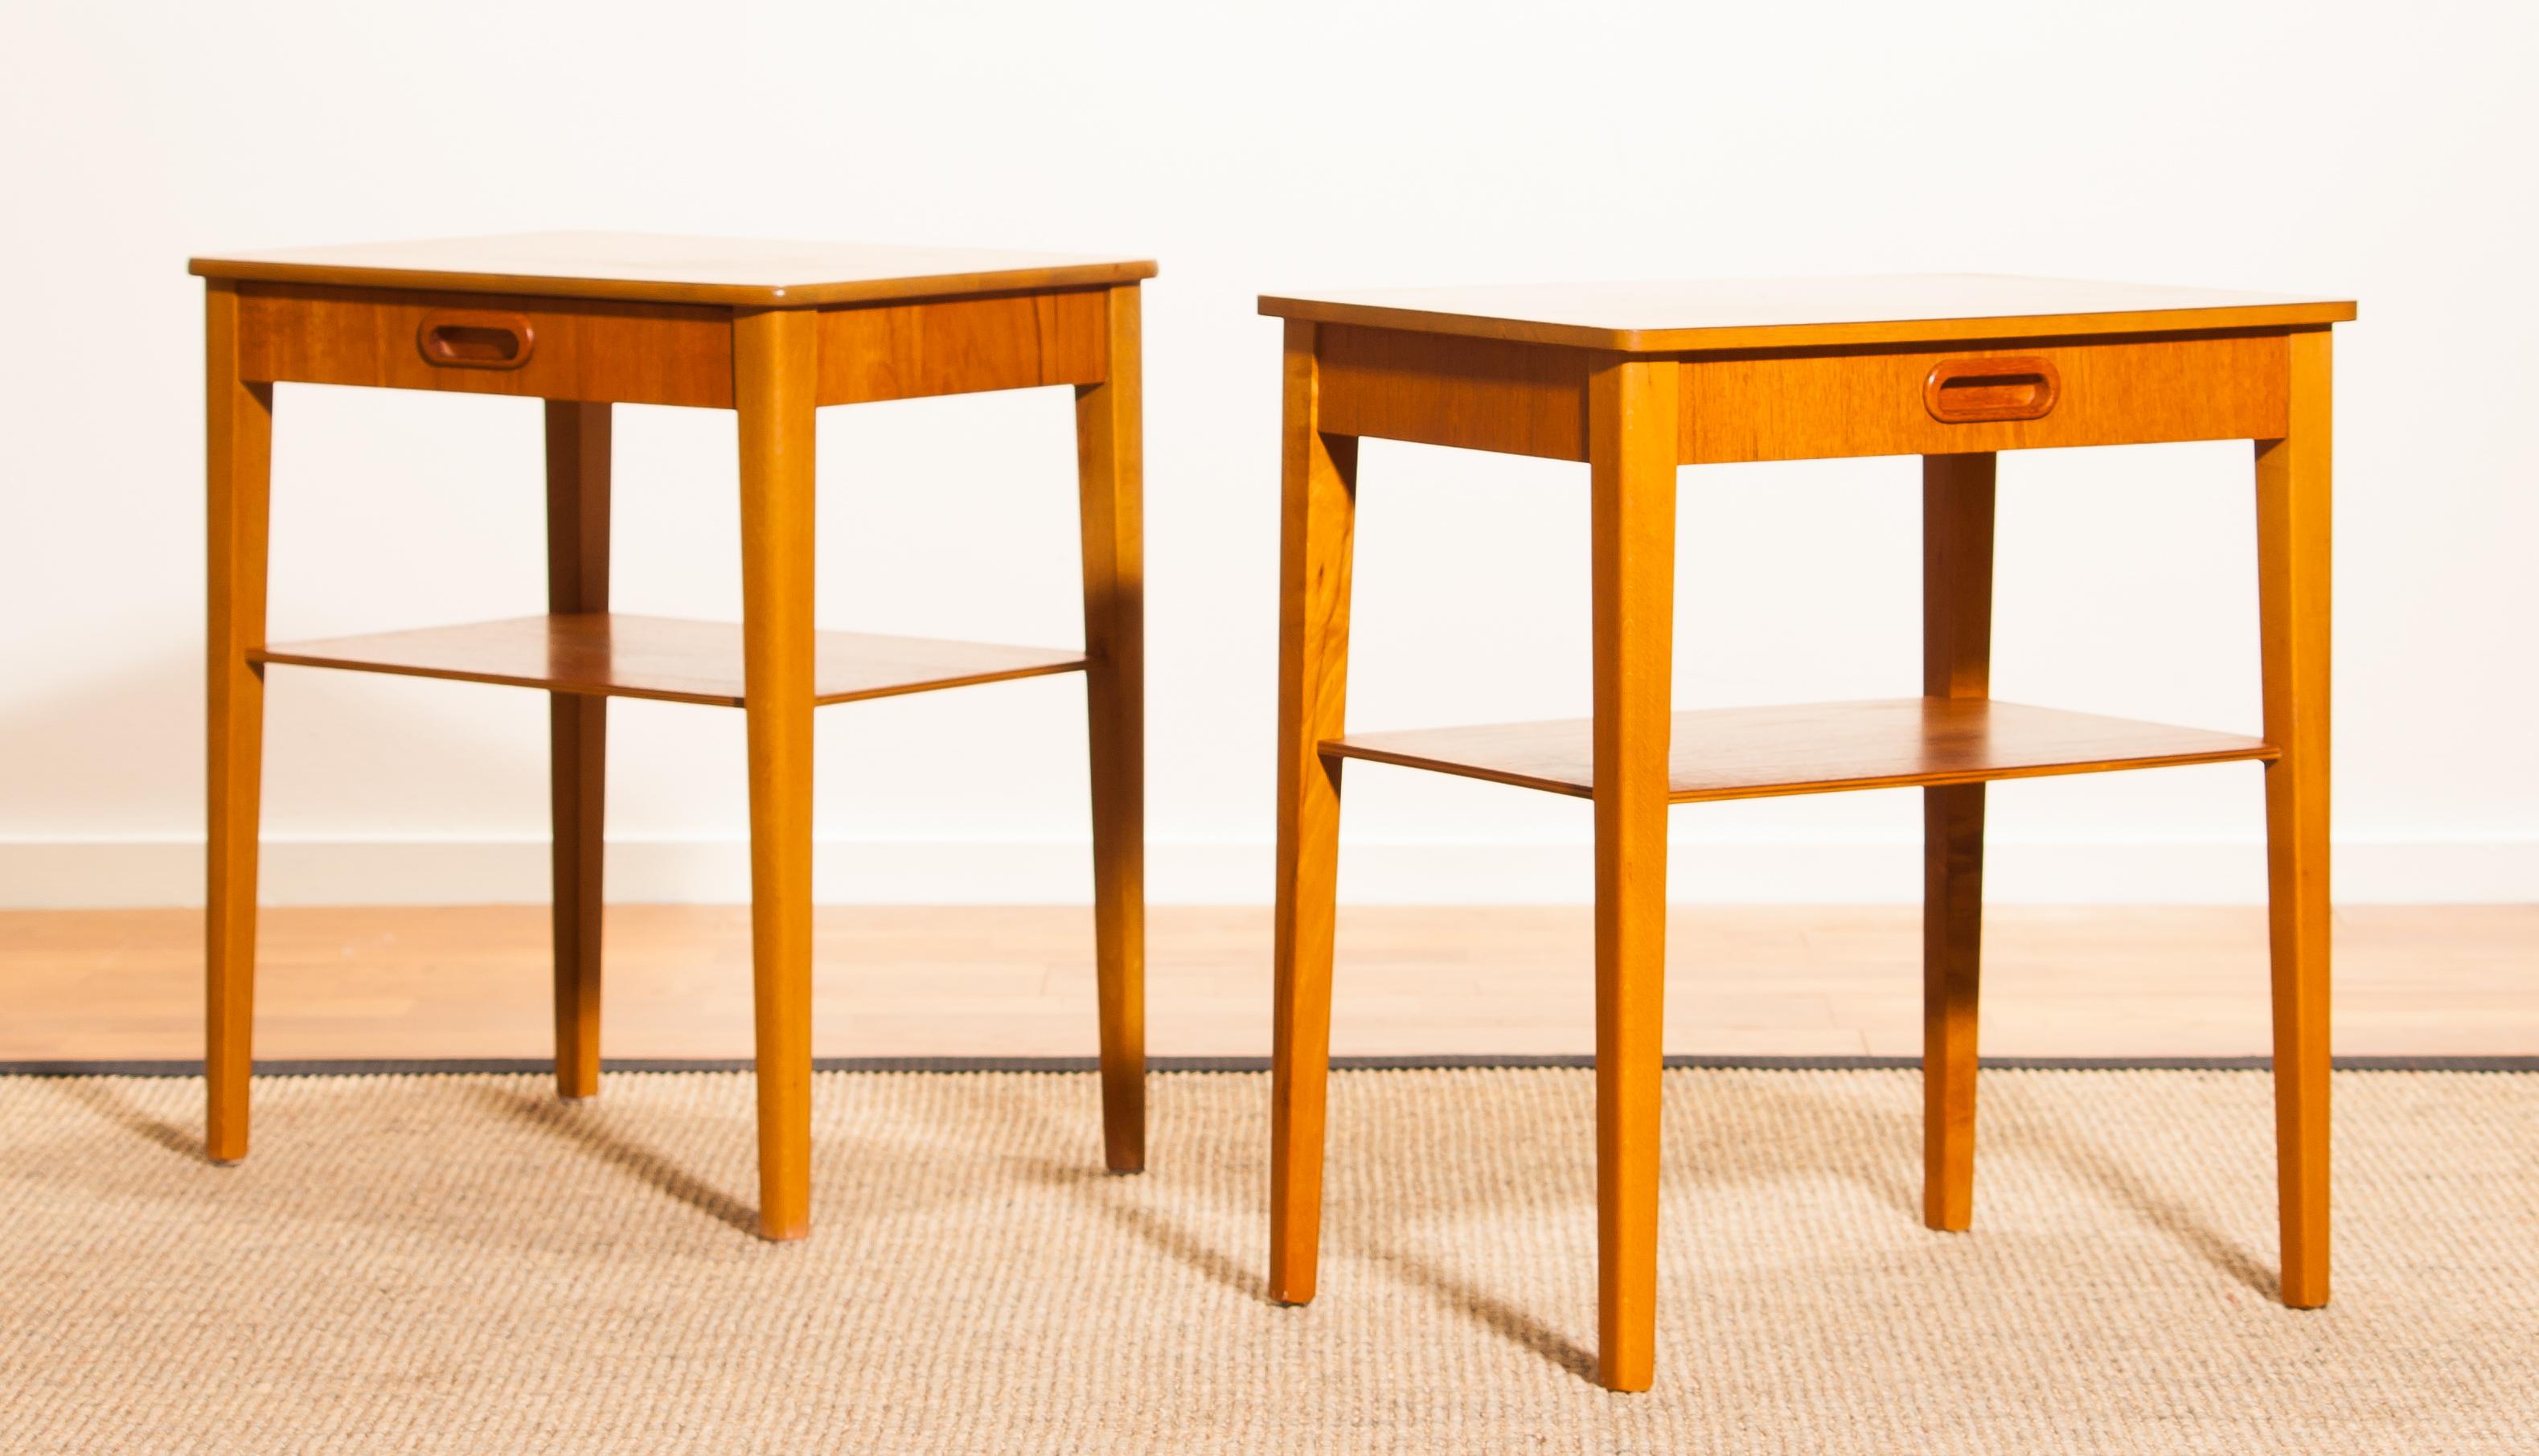 Beautiful pair of bedside tables by Björkås Möbelfabrik, Sweden.
They are made of teak, with single drawer and magazine shelf.
The tables are in a very nice condition.
Period 1950s.
Dimensions H 50 cm, W 45 cm, D 32 cm.